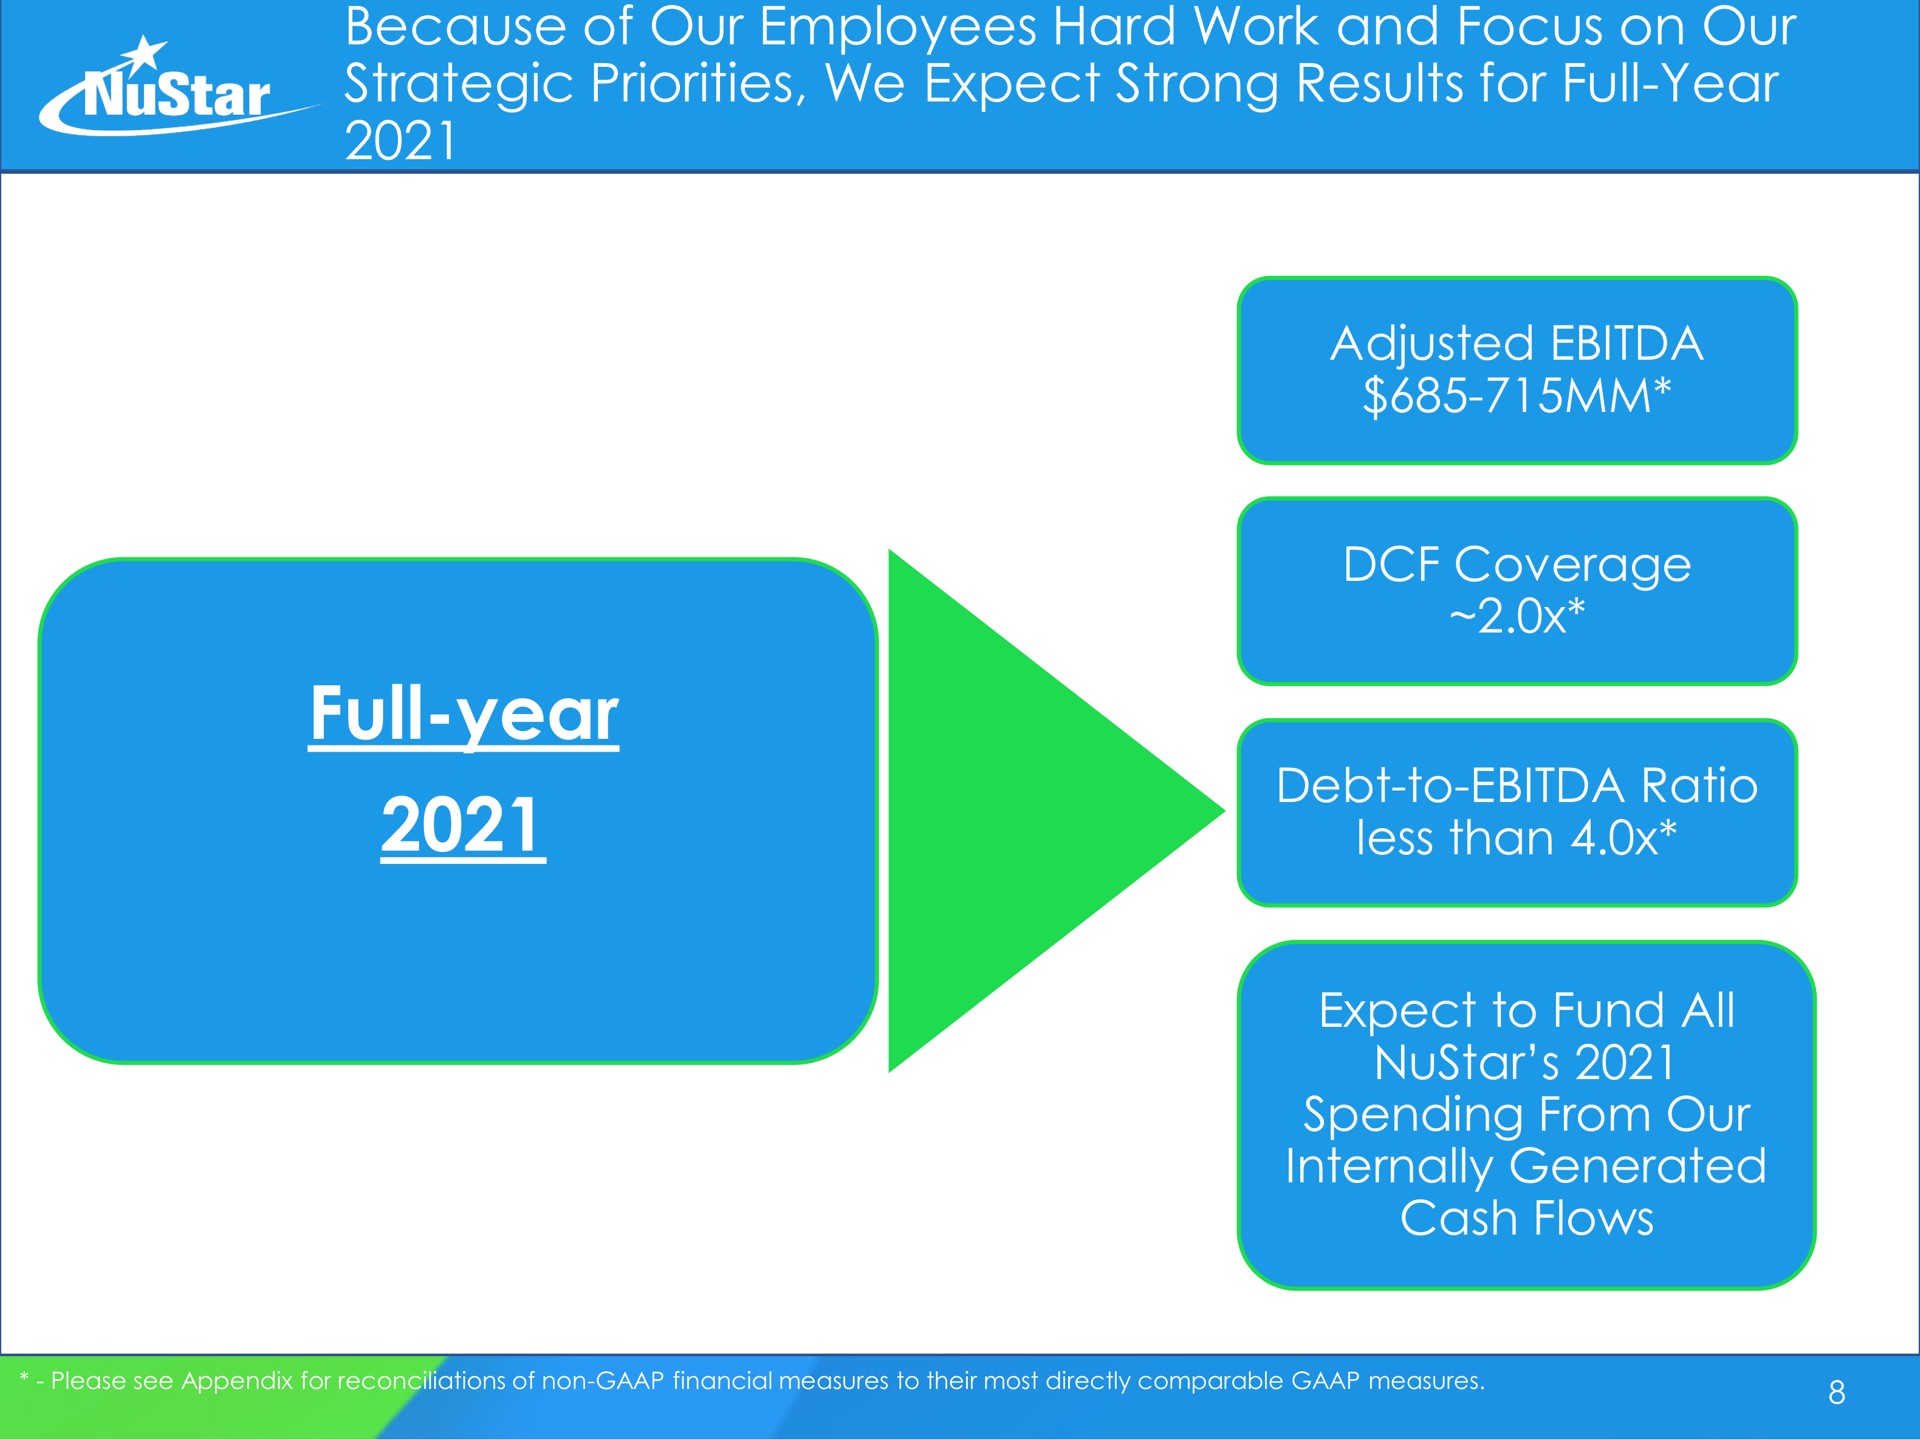 because of our employees hard work and focus on our strategic priorities we expect strong results for full year full year adjusted coverage debt to ratio less than expect to fund all spending from our internally generated cash flows star | NuStar Energy